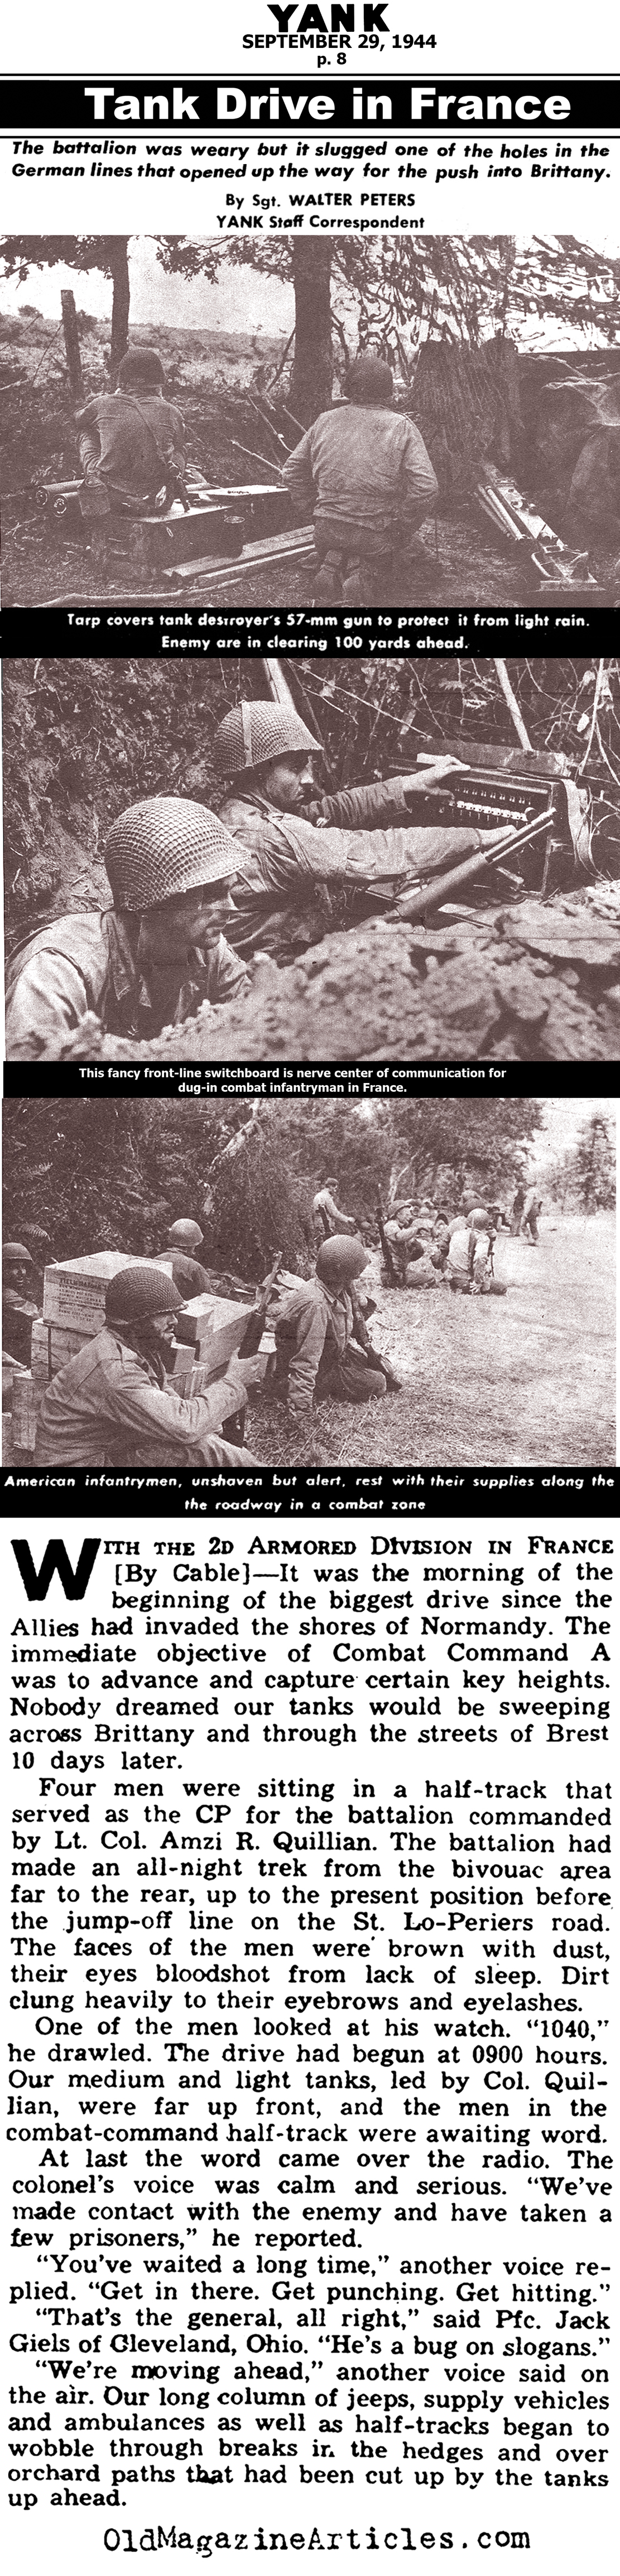 War Stories from the Second Armored Division in Normandy (Yank Magazine, 1944)